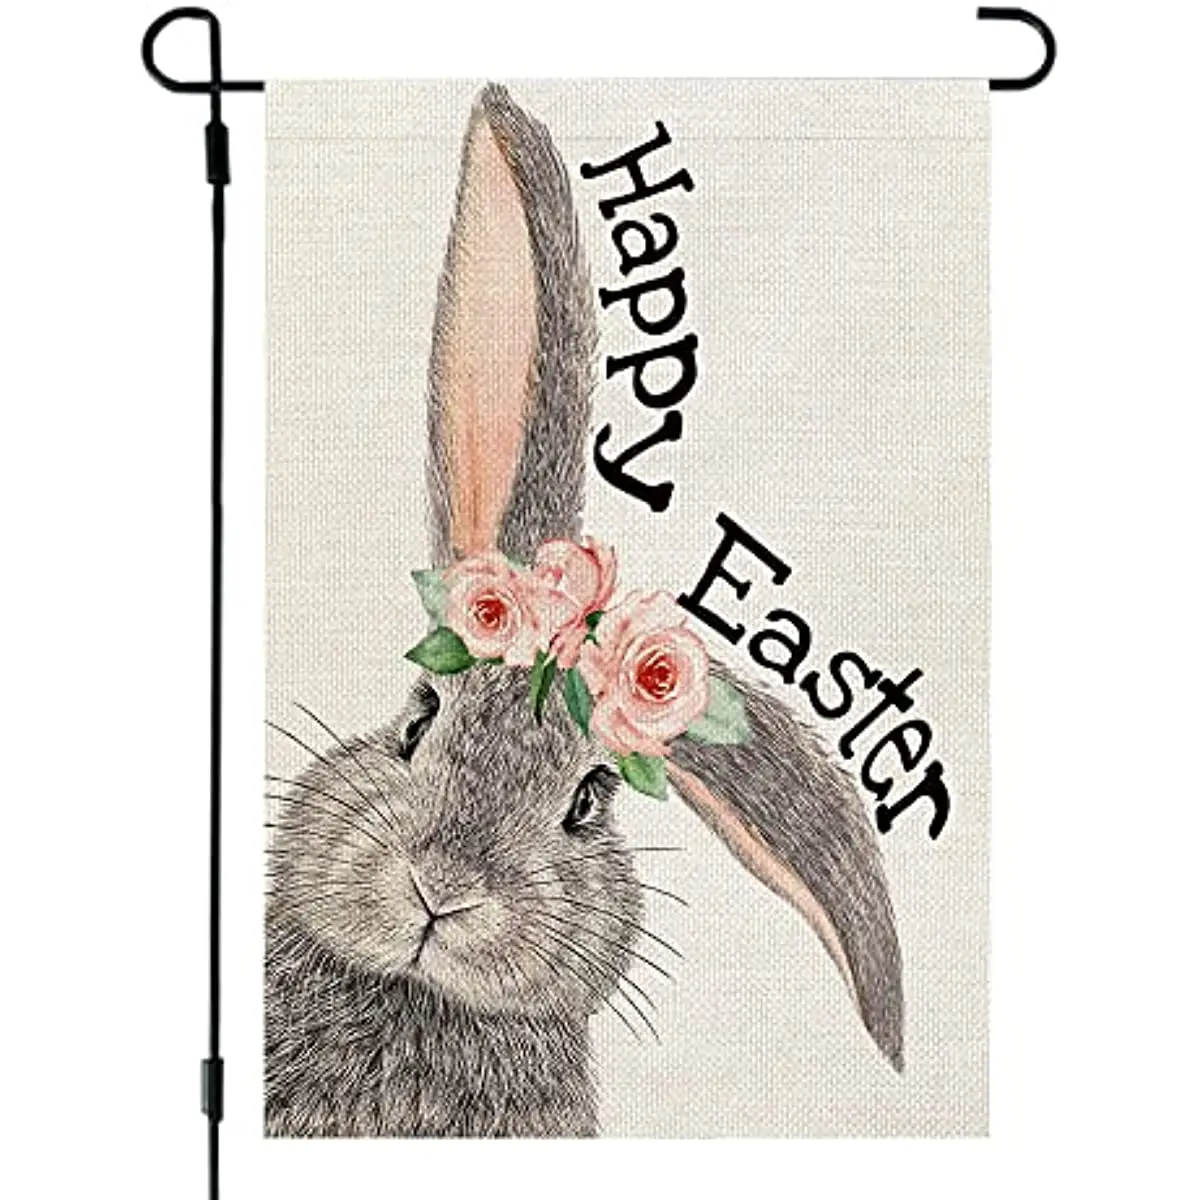 

Happy Easter Bunny Garden Flag 12X18 Inch Small Double Sided for Outside Burlap Yard Holiday Decoration